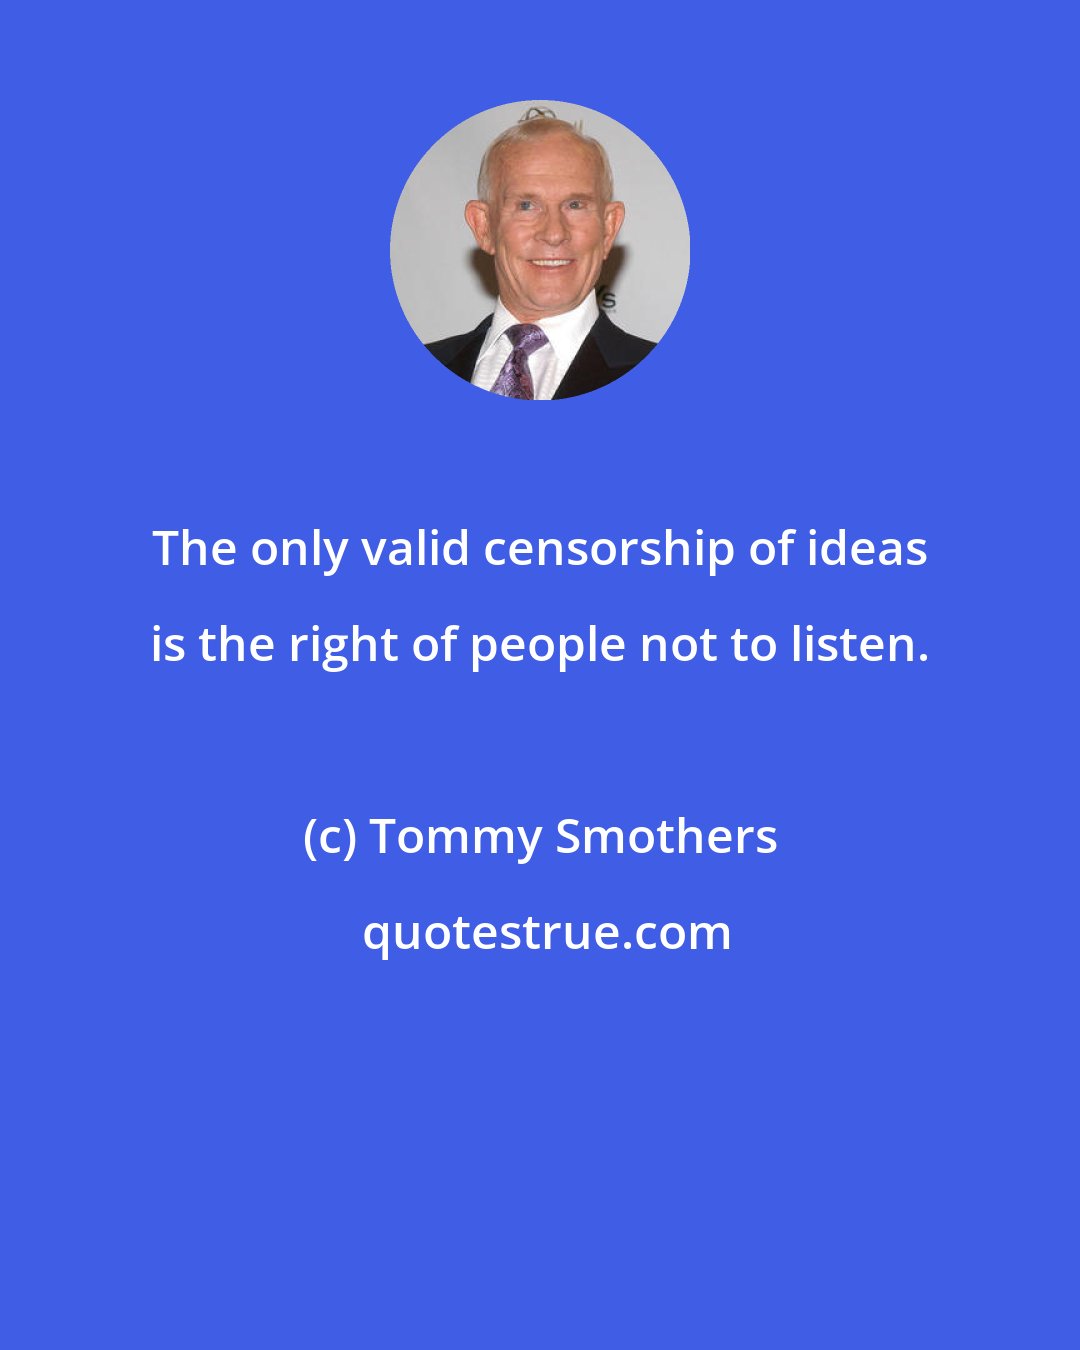 Tommy Smothers: The only valid censorship of ideas is the right of people not to listen.